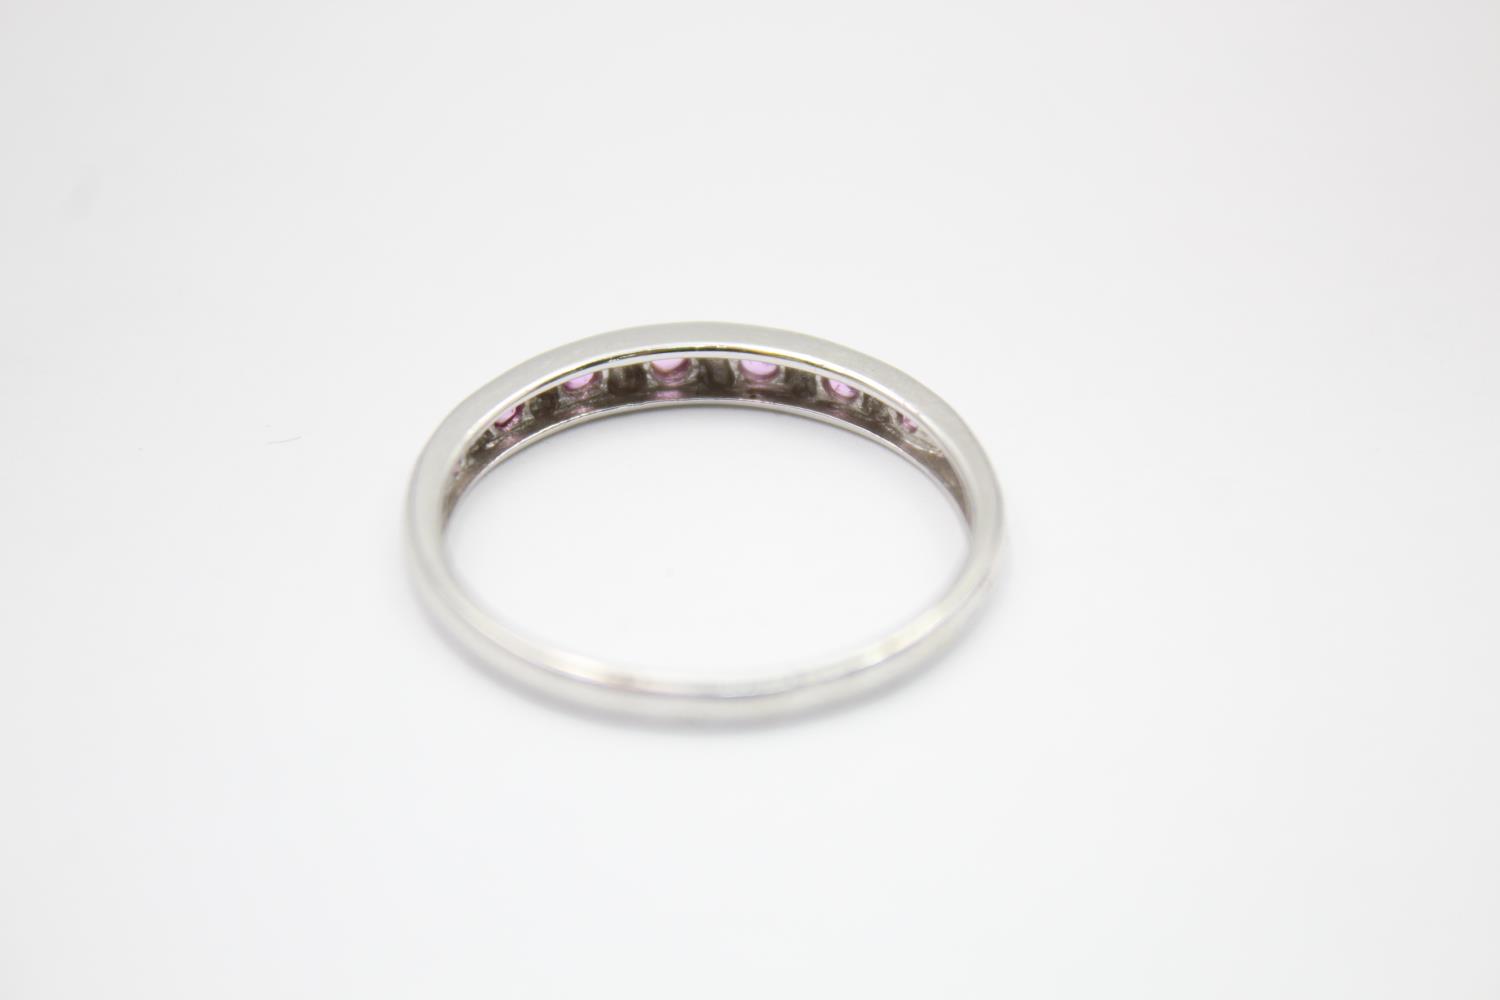 9ct white gold spink sapphire half eternity band ring (2g) Size V - Image 4 of 4